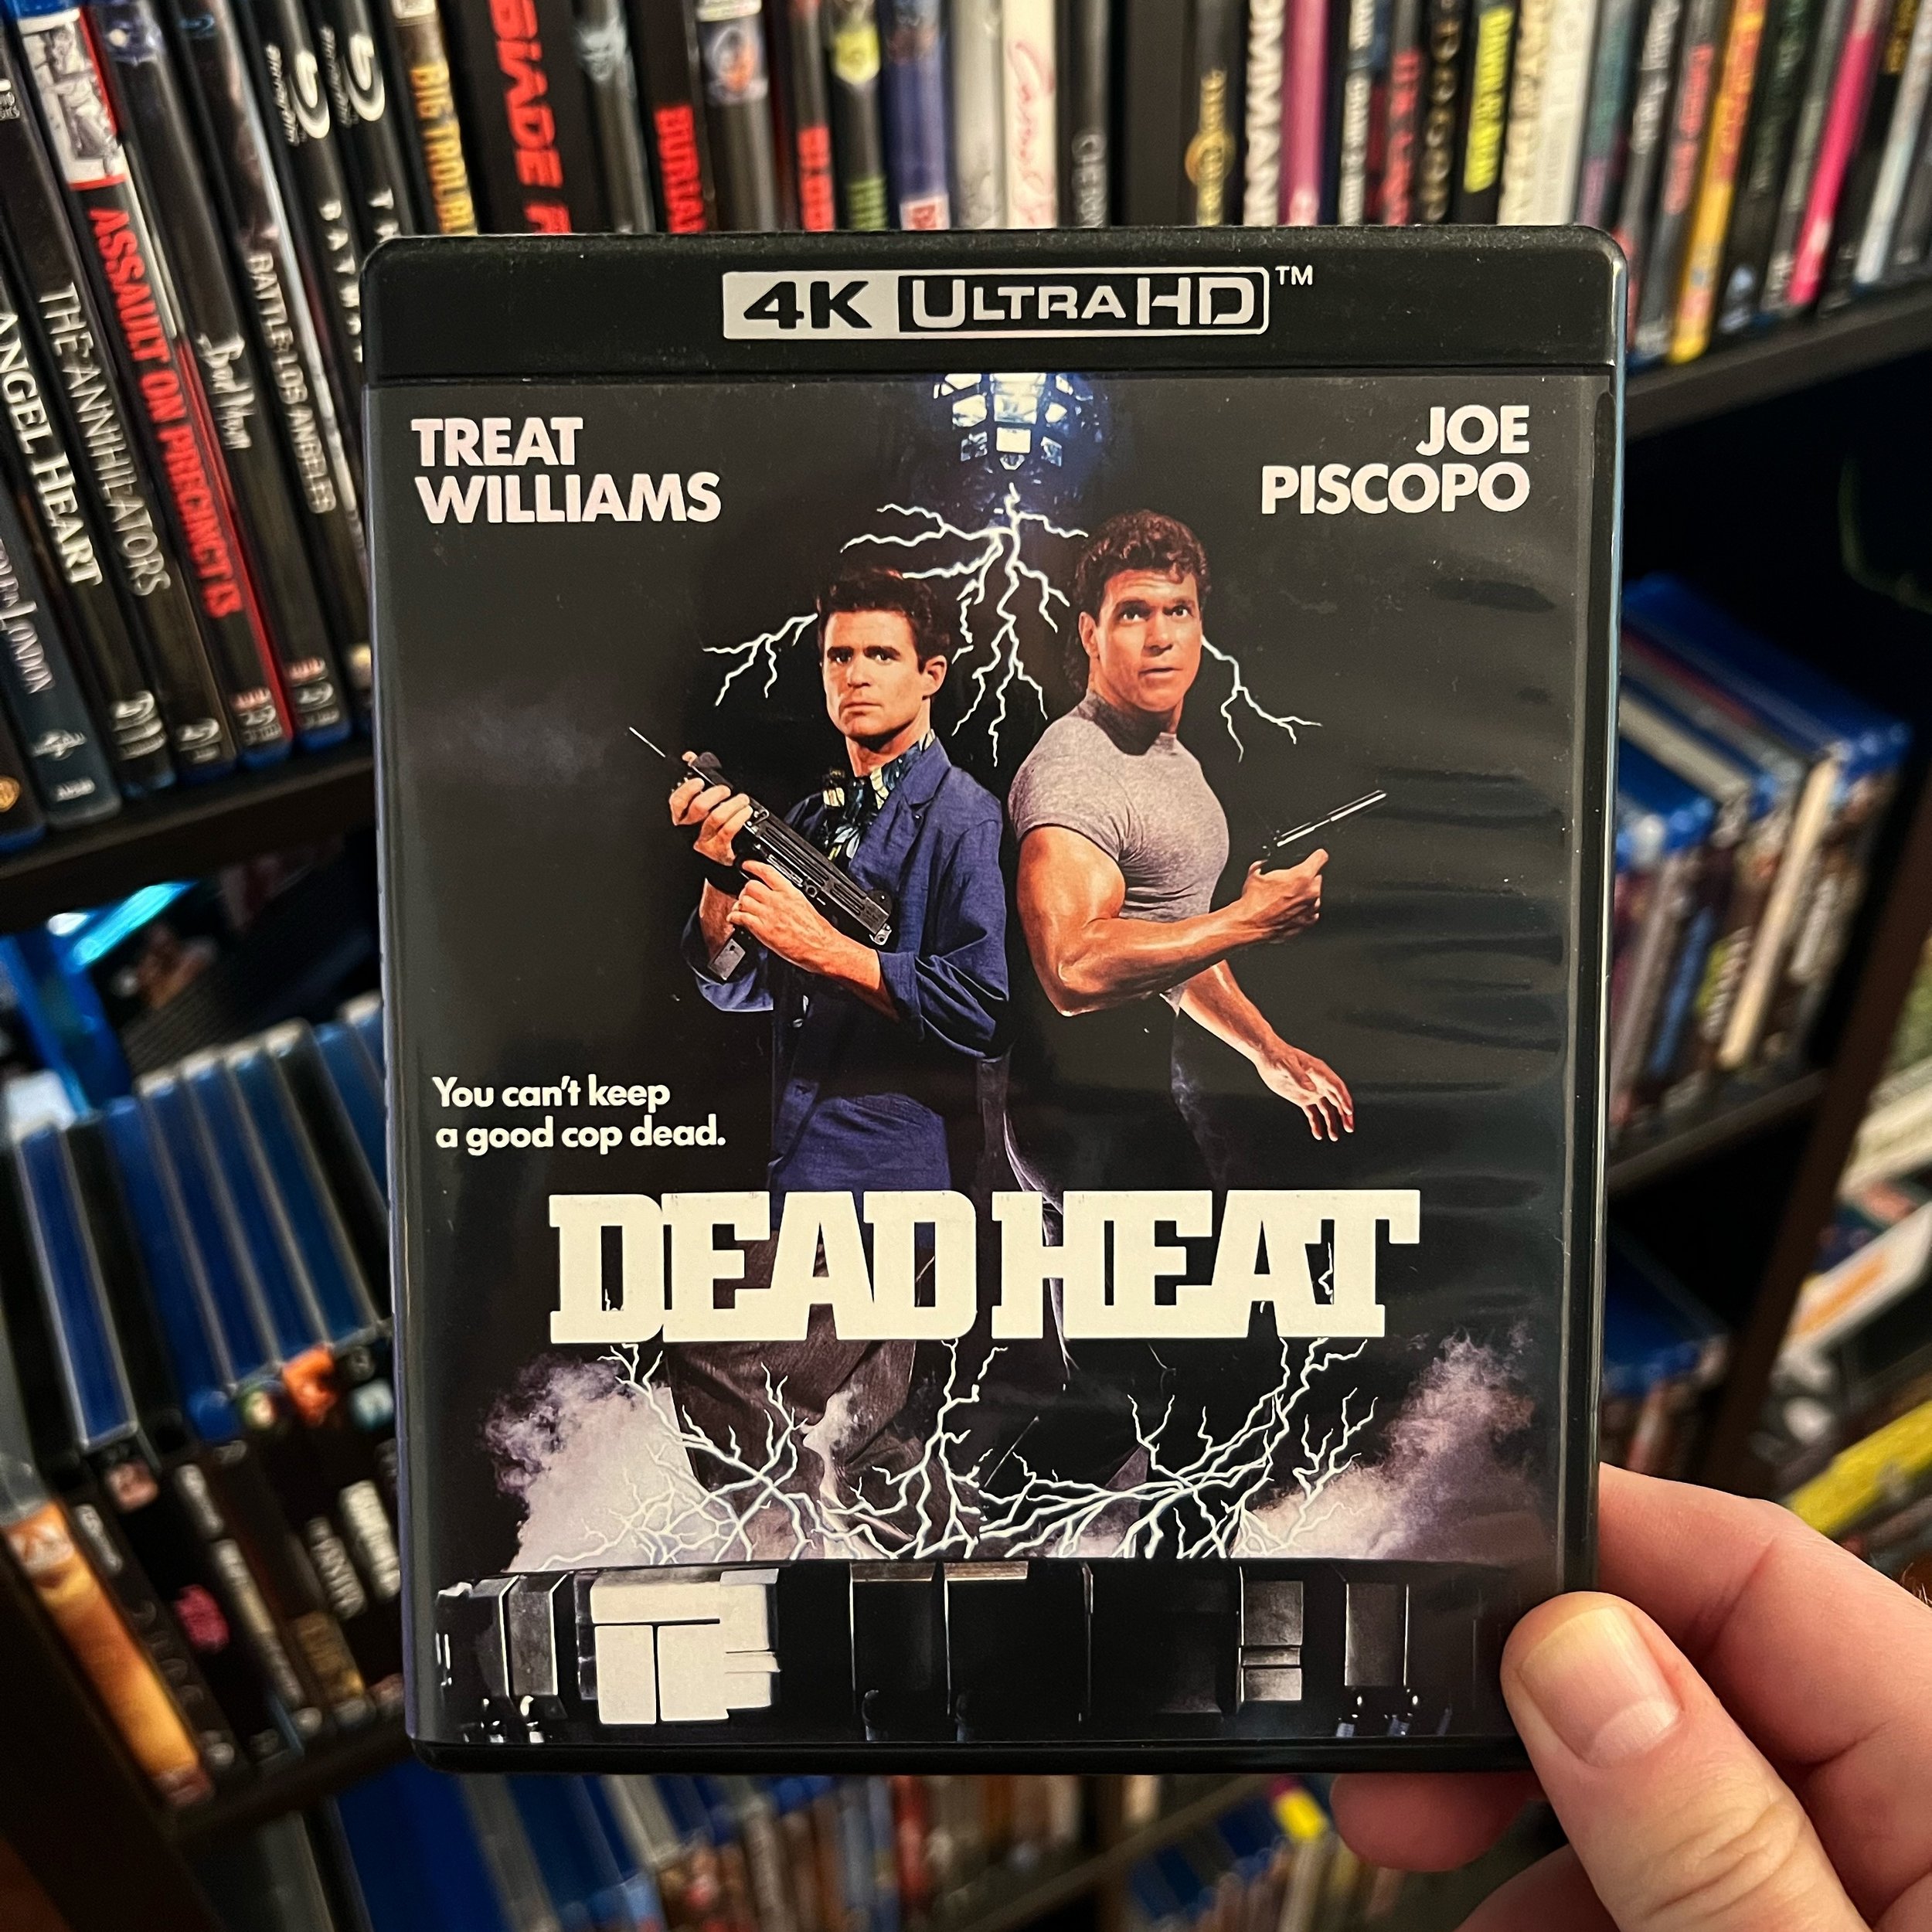 Happy 36th anniversary to DEAD HEAT! It came out on this day in 1988. Listen to our review in celebration! It&rsquo;s available now on Apple Podcasts, Spotify, and all major pod-apps!

www.podcastingafterdark.com/padepisodes/dead-heat-1988-review
&md